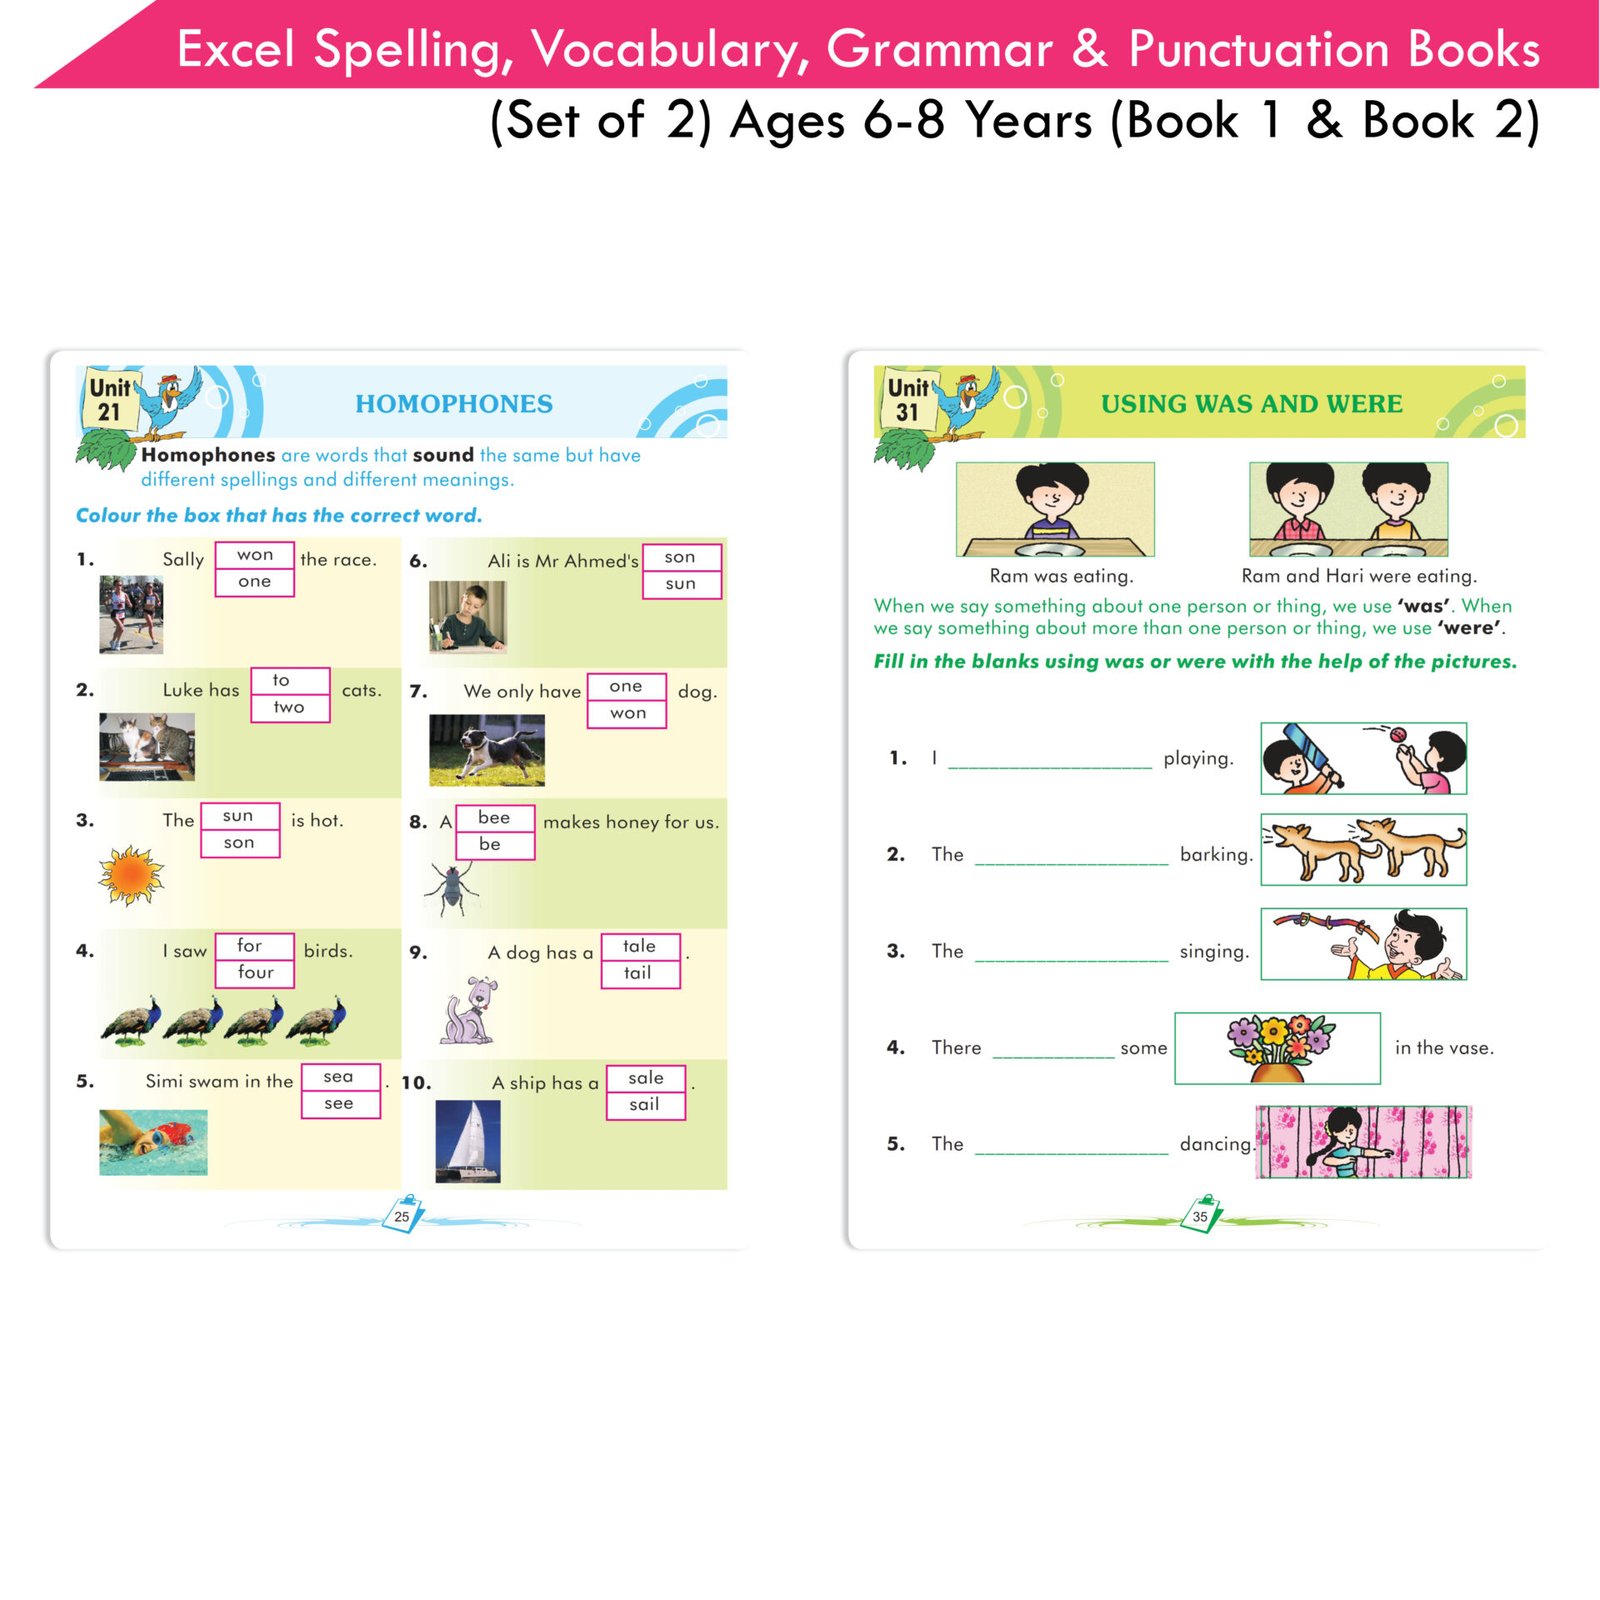 Excel Basic Skills Spelling Vocabulary Grammar and Punctuation Book Set Ages 6 8 Set of 2 6